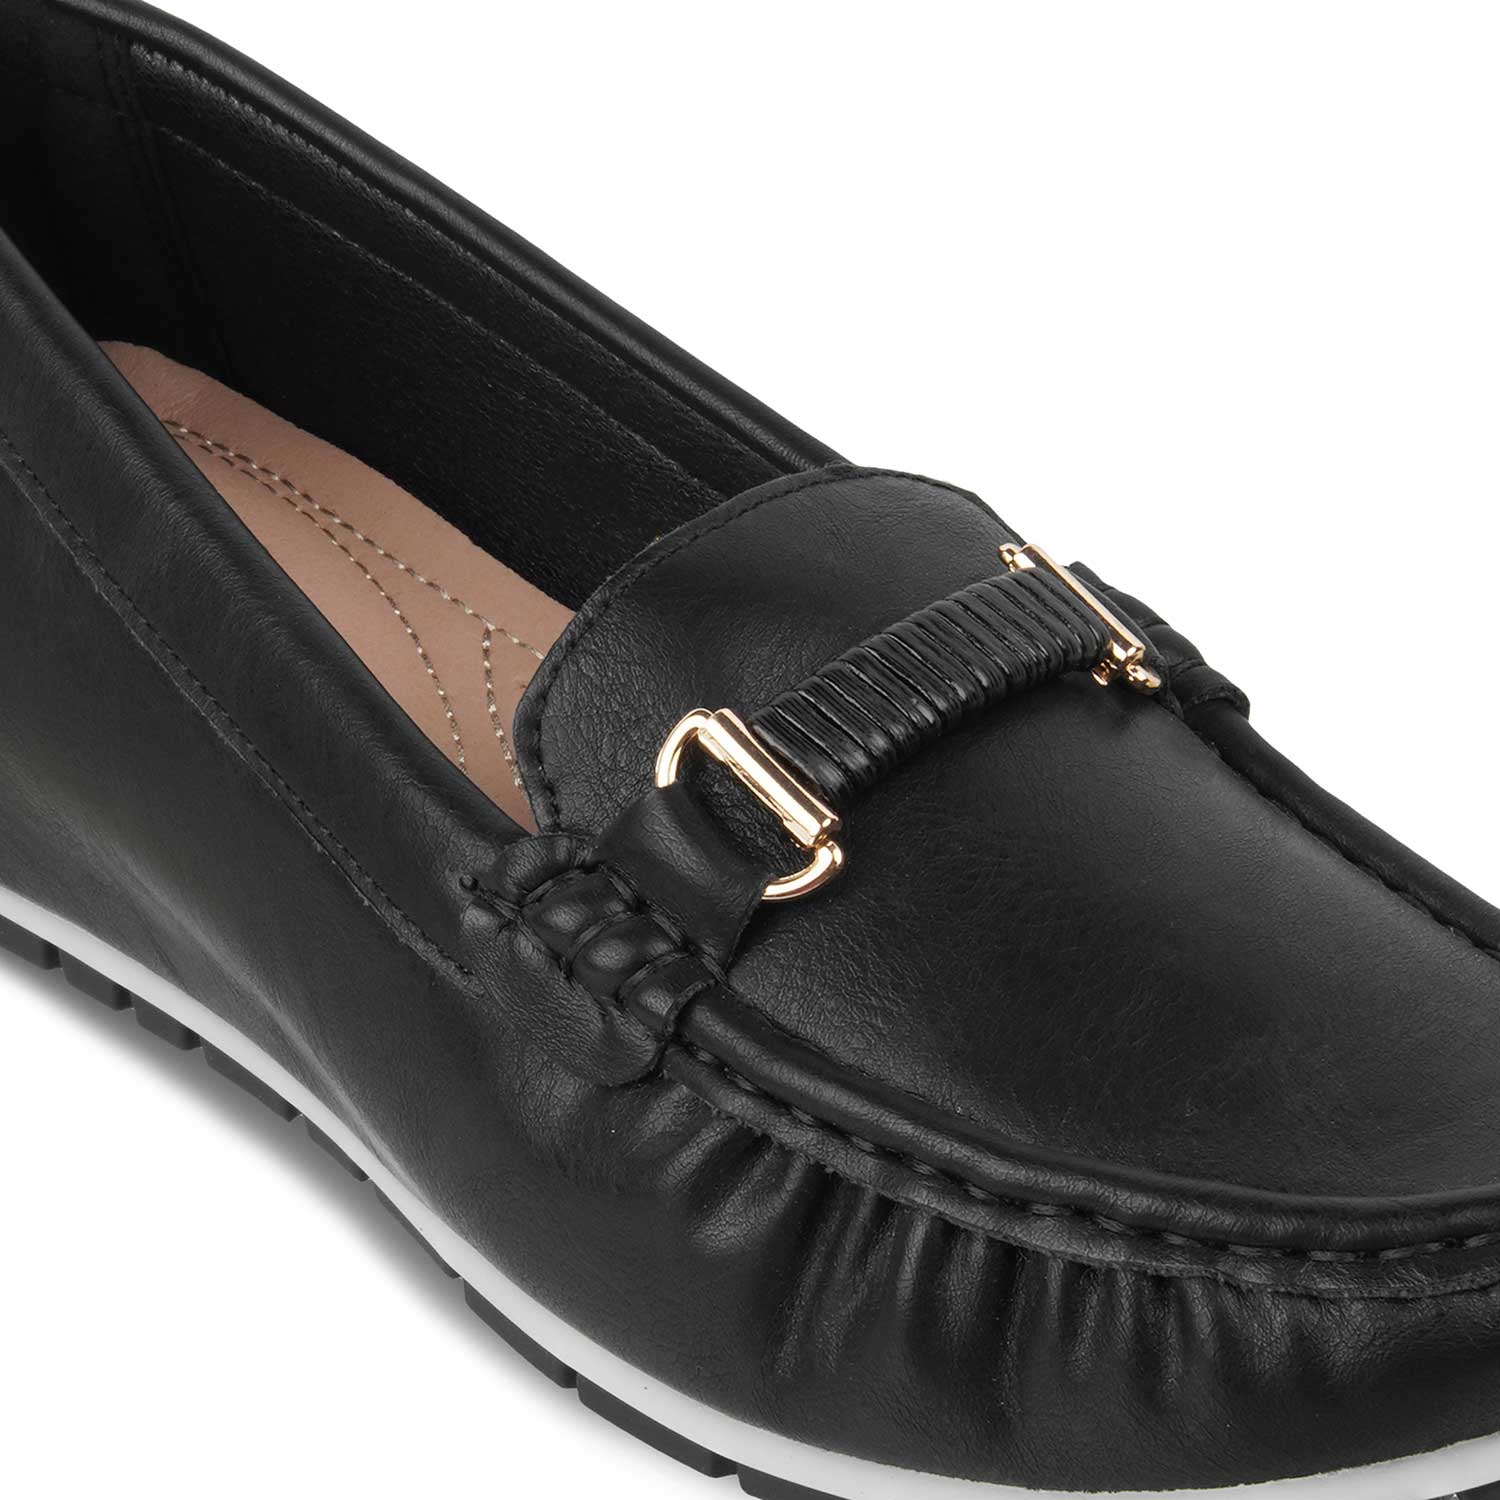 The Yonor Black Women's Dress Wedge Loafer Tresmode